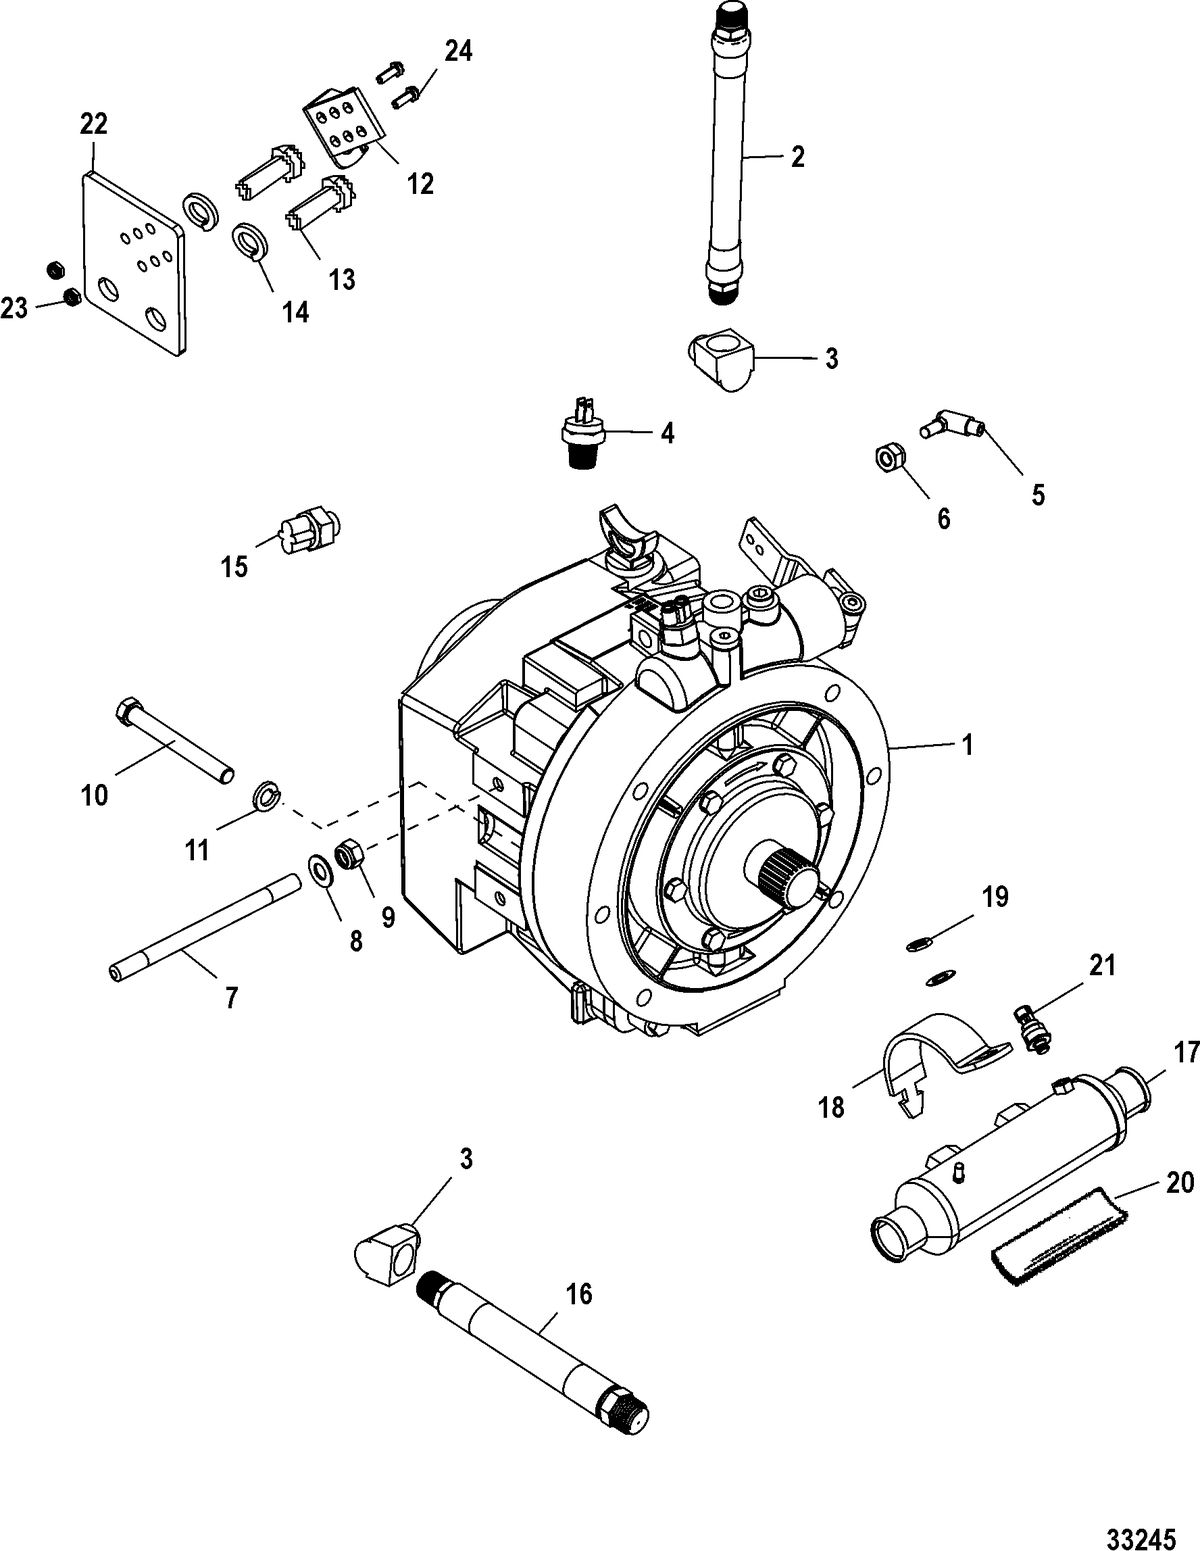 MERCRUISER 5.7L MPI SKI Transmission and Related Parts(ZF - 45C)